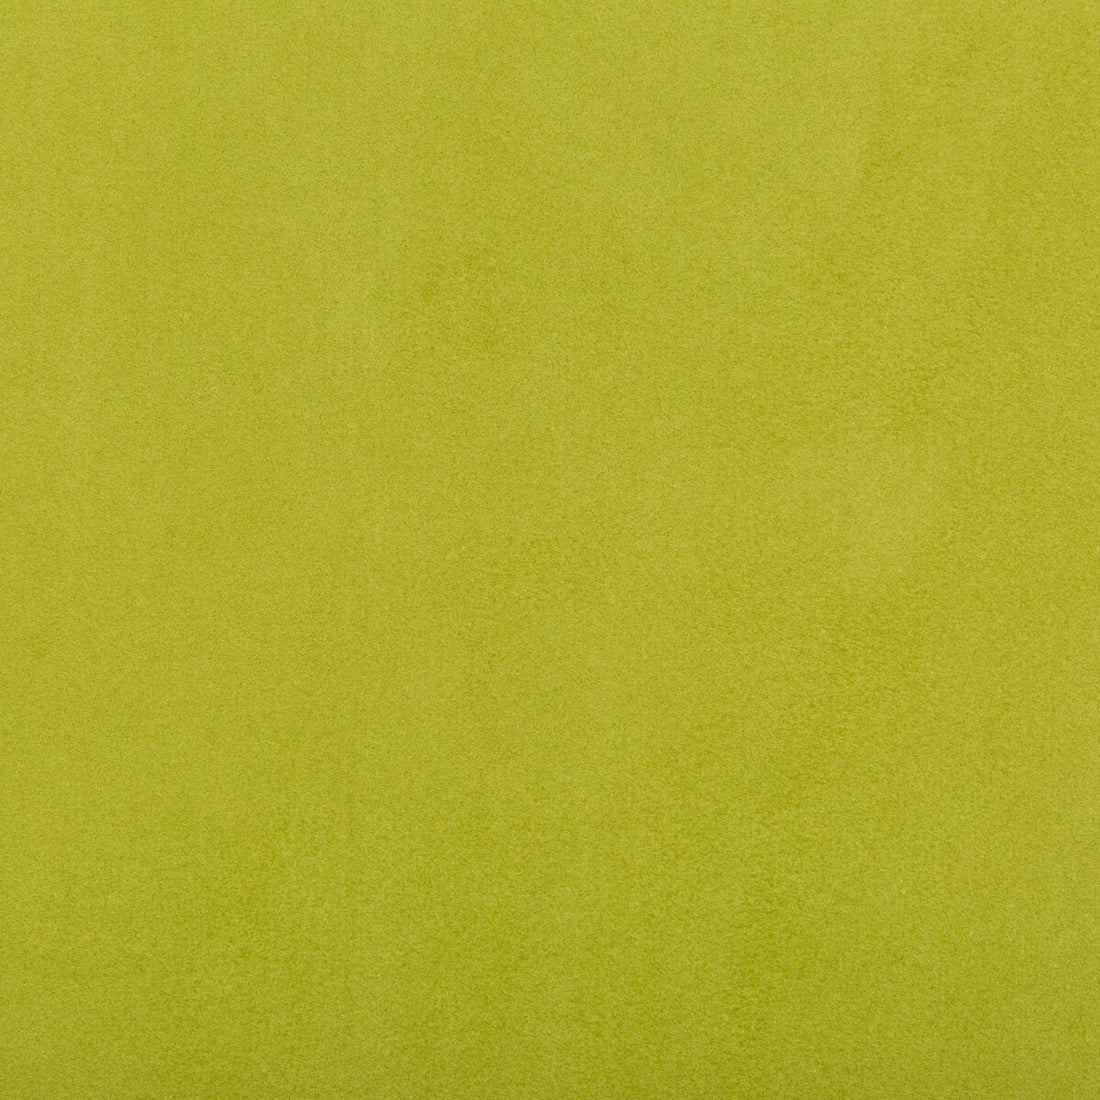 Ultrasuede Green fabric in key lime color - pattern 30787.333.0 - by Kravet Design in the Performance collection